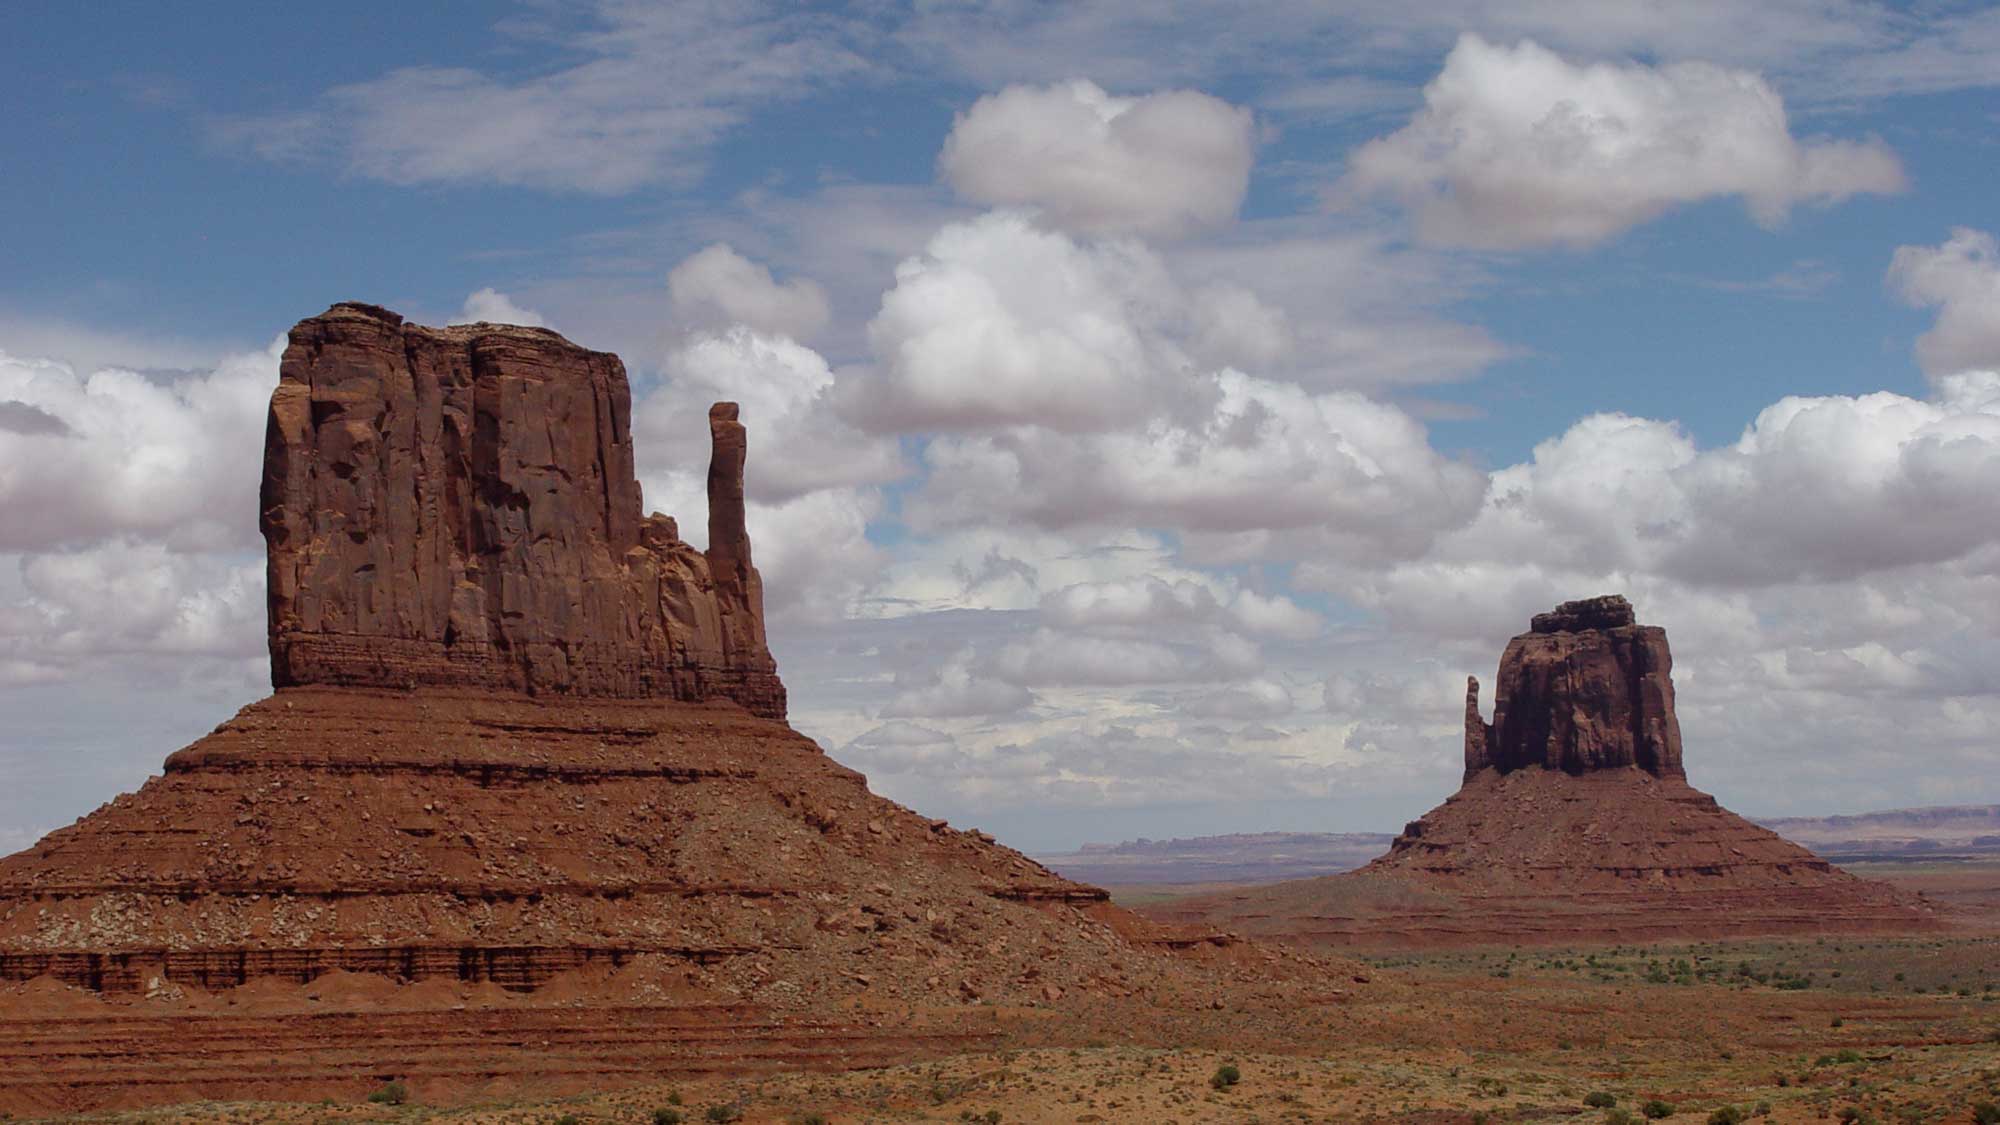 Photograph of West Mitten Butte and East Mitten Butte, Monument Valley, Utah and Arizona.